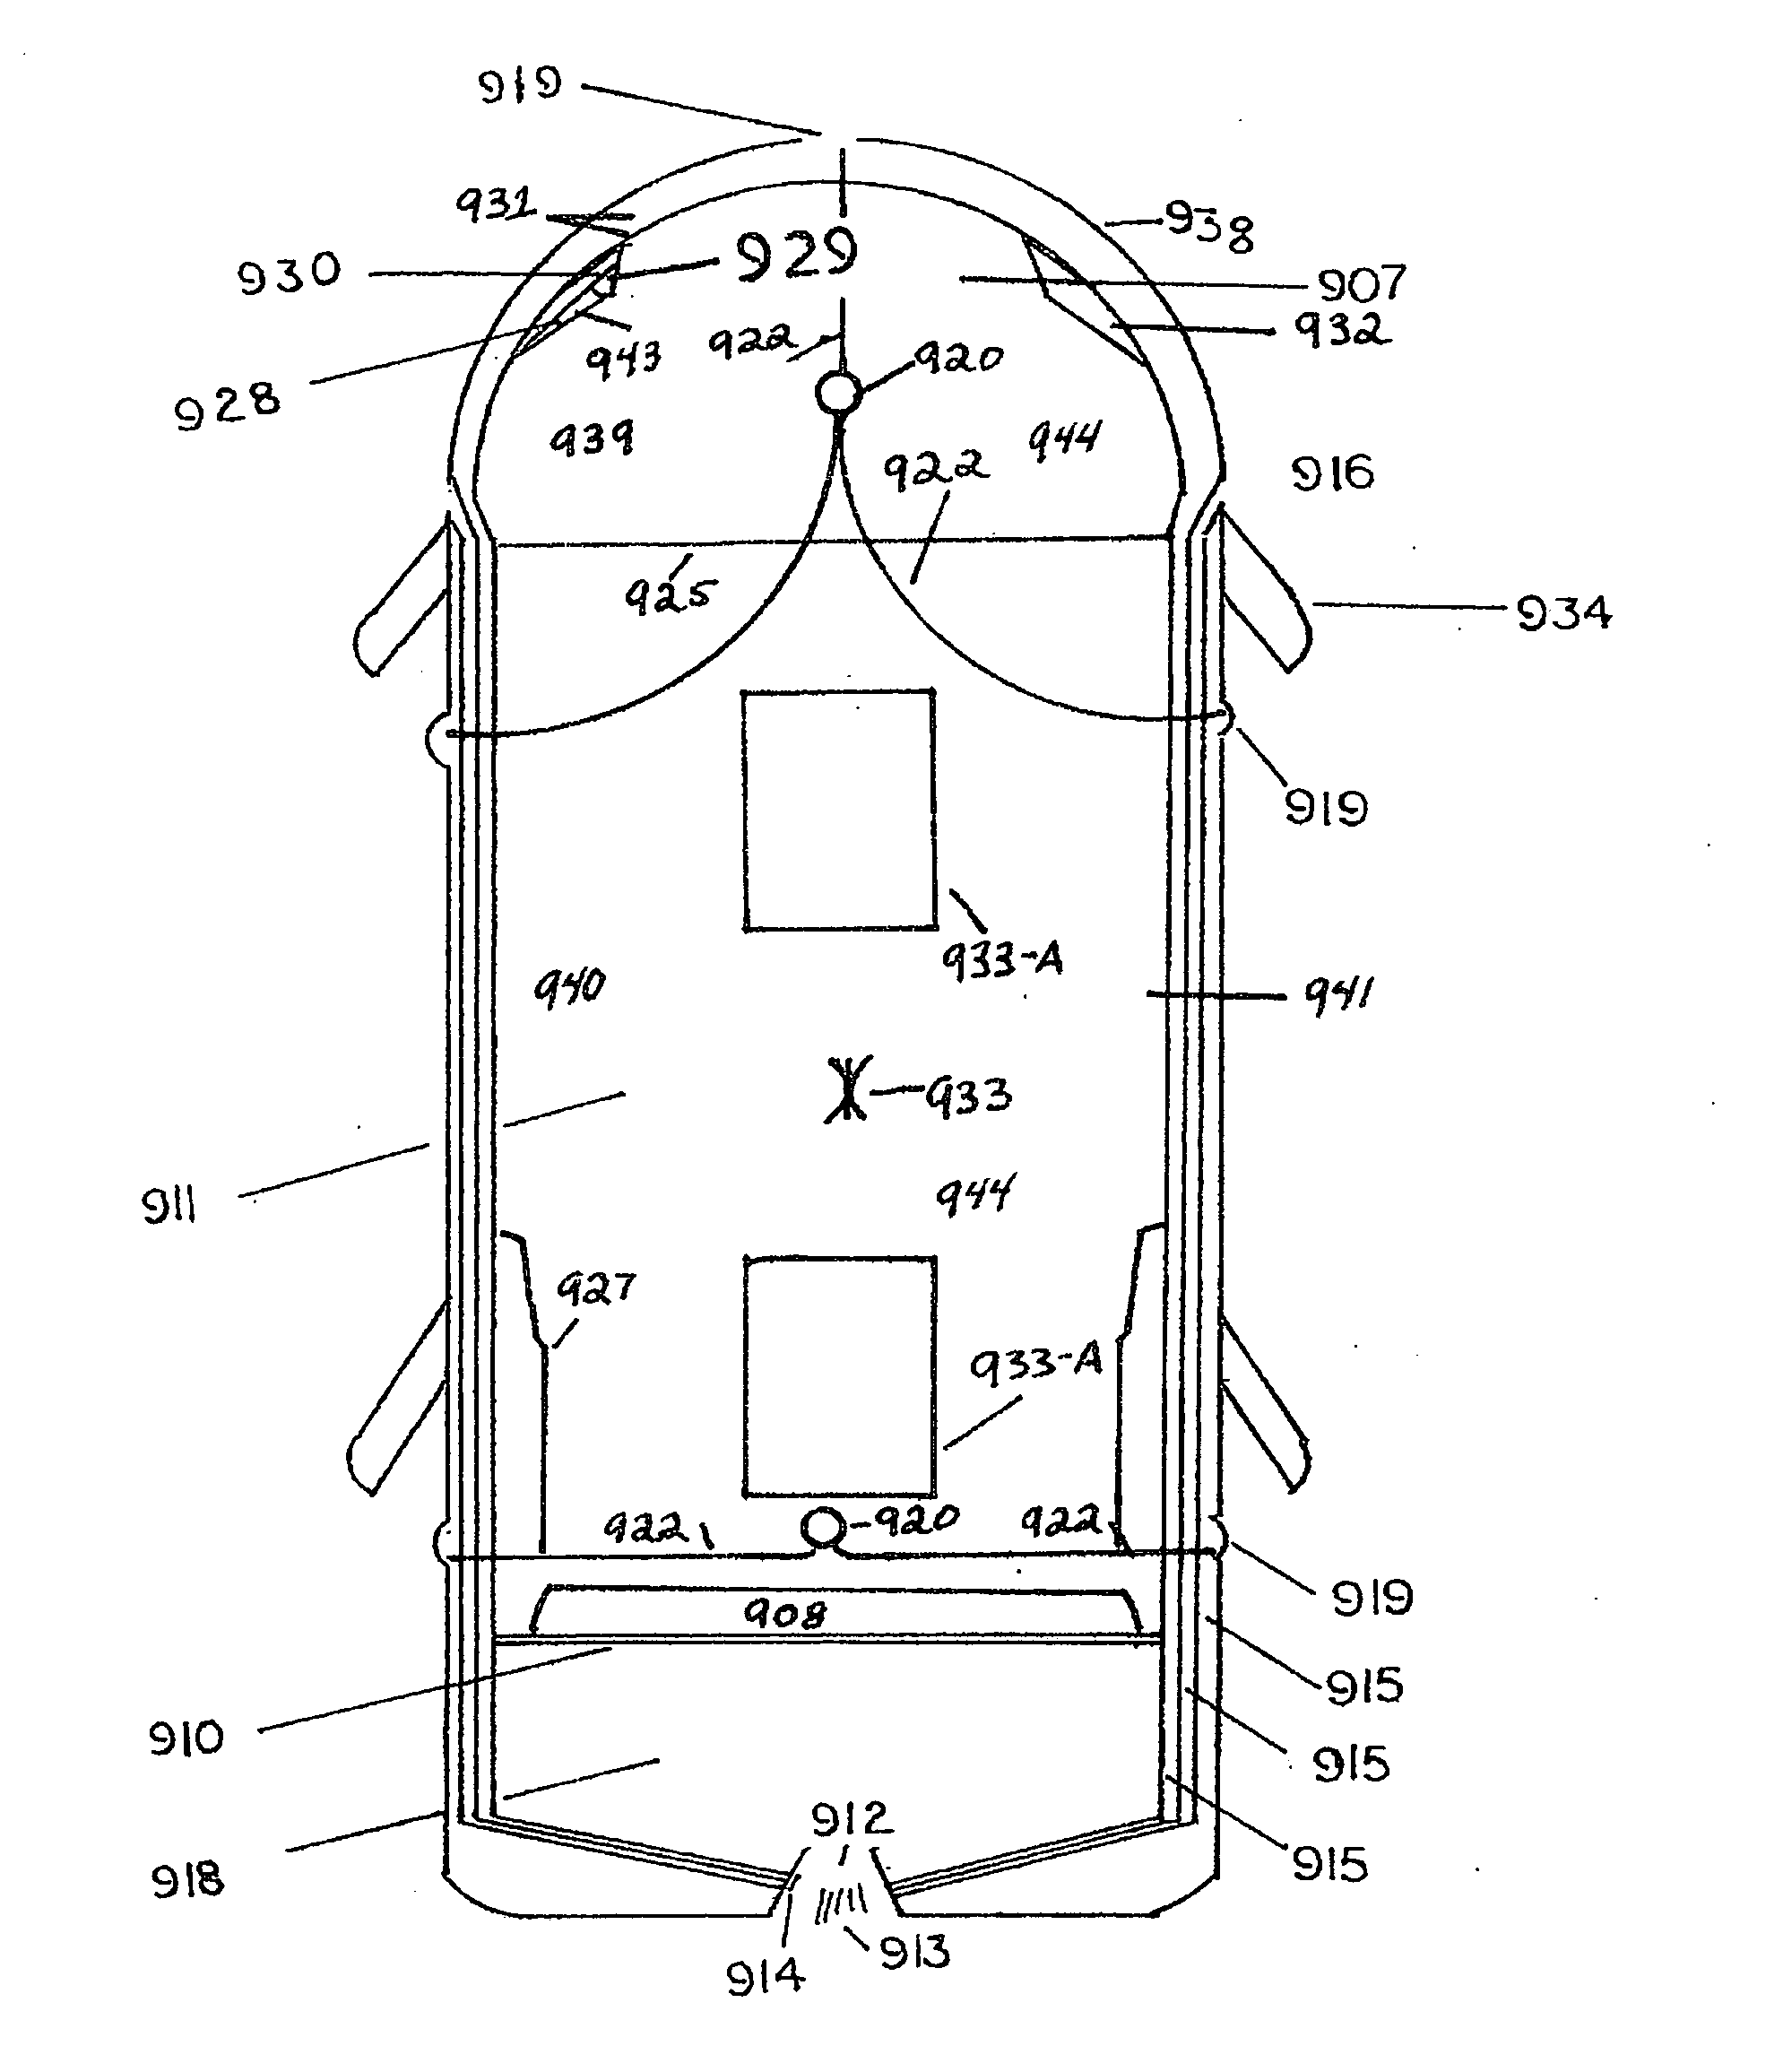 Fire suppression delivery system